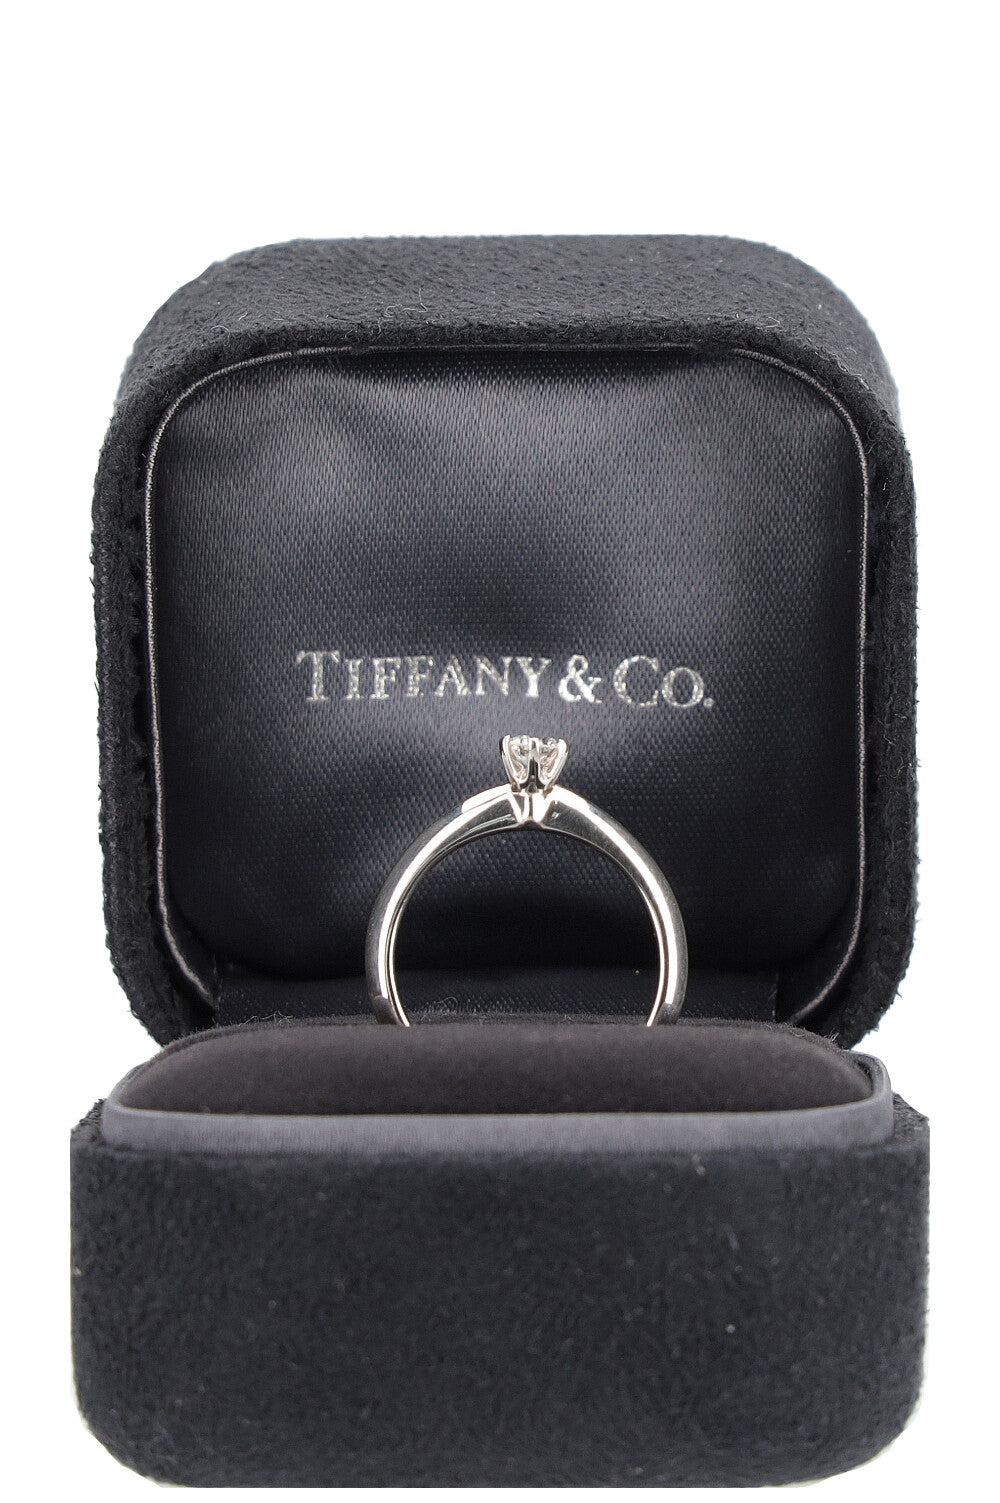 TIFFANY&CO Solitaire Ring